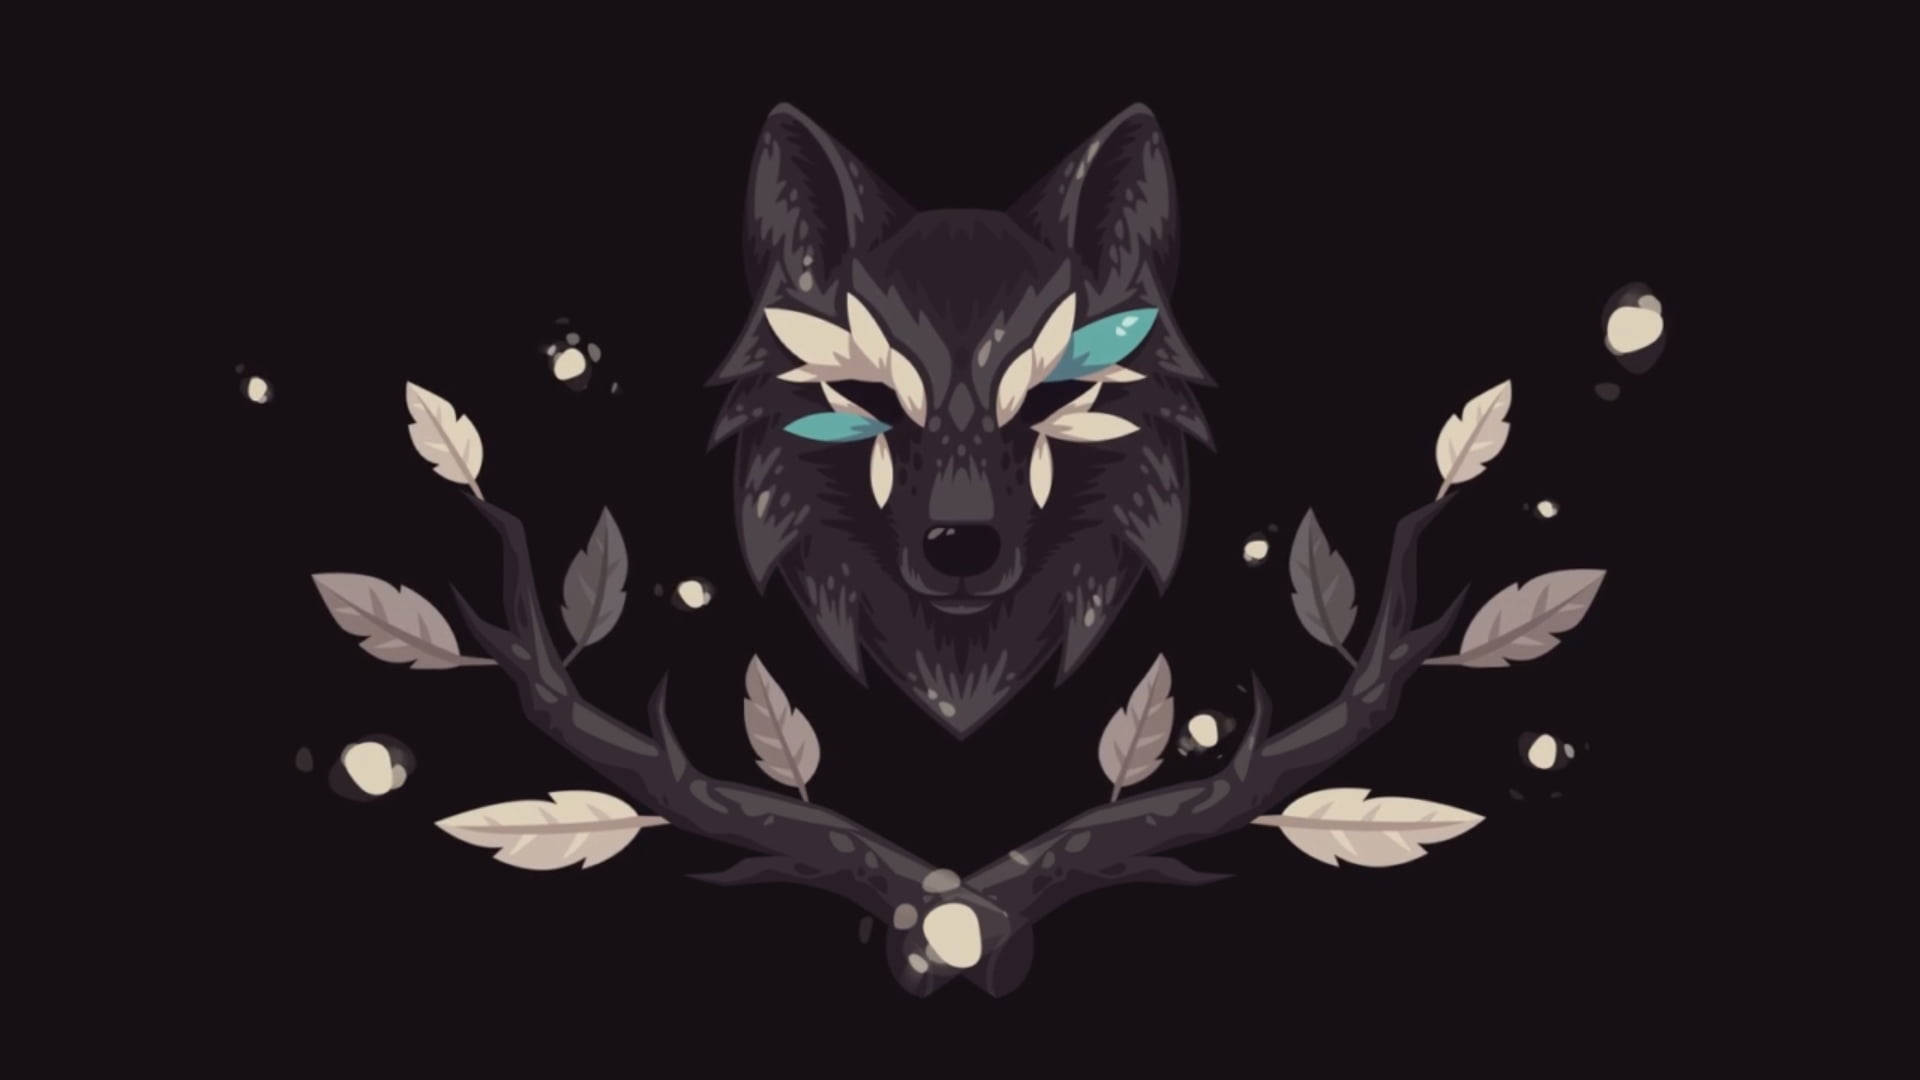 Cool Black Wolf On Magical Branches Wallpaper